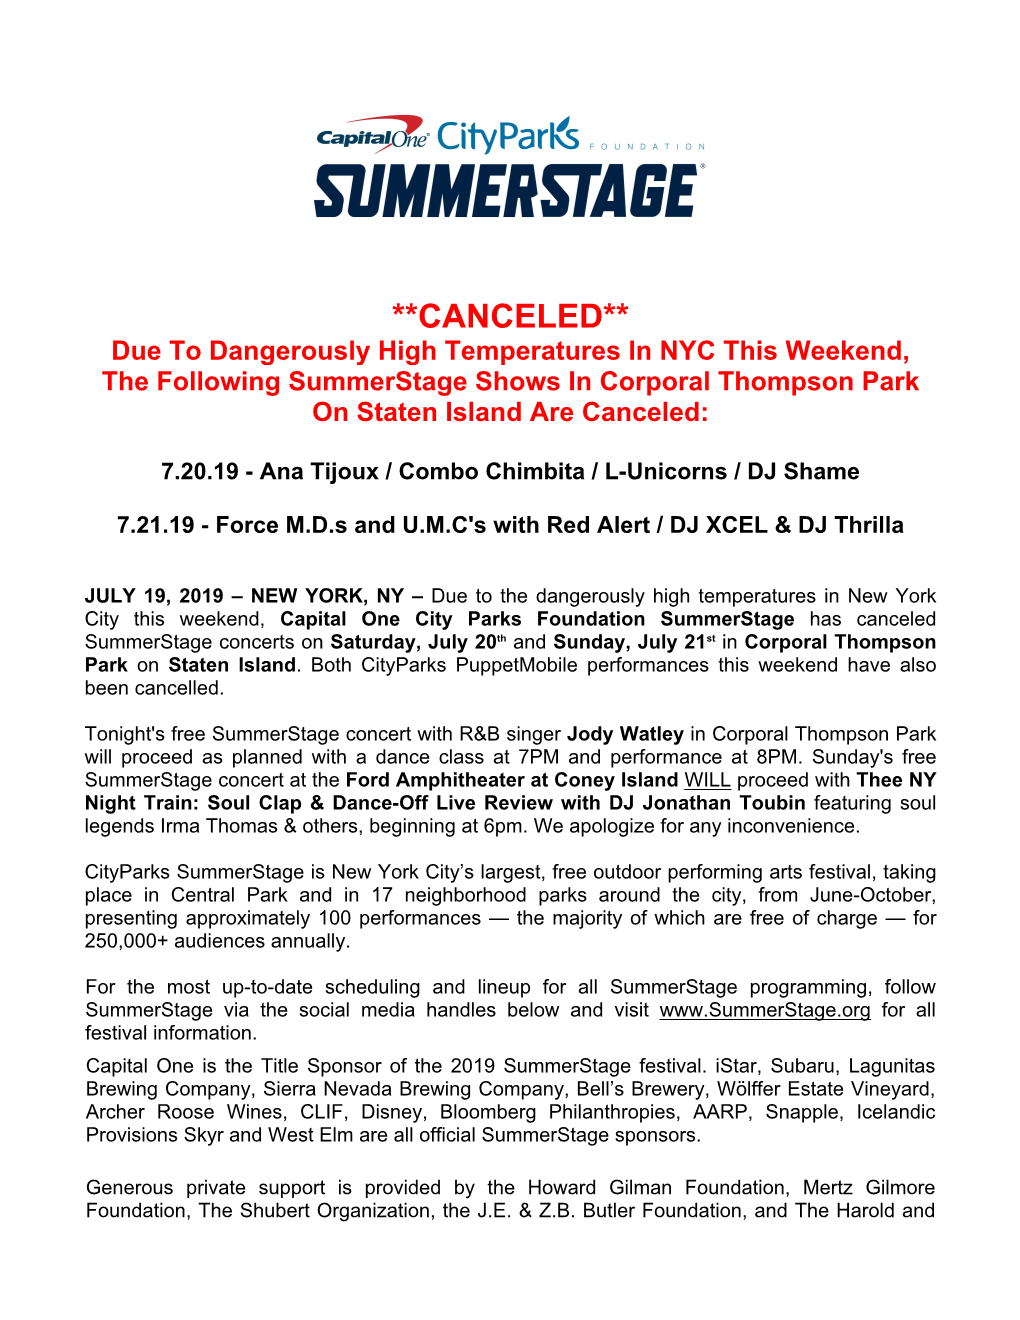 CANCELED** Due to Dangerously High Temperatures in NYC This Weekend, the Following Summerstage Shows in Corporal Thompson Park on Staten Island Are Canceled